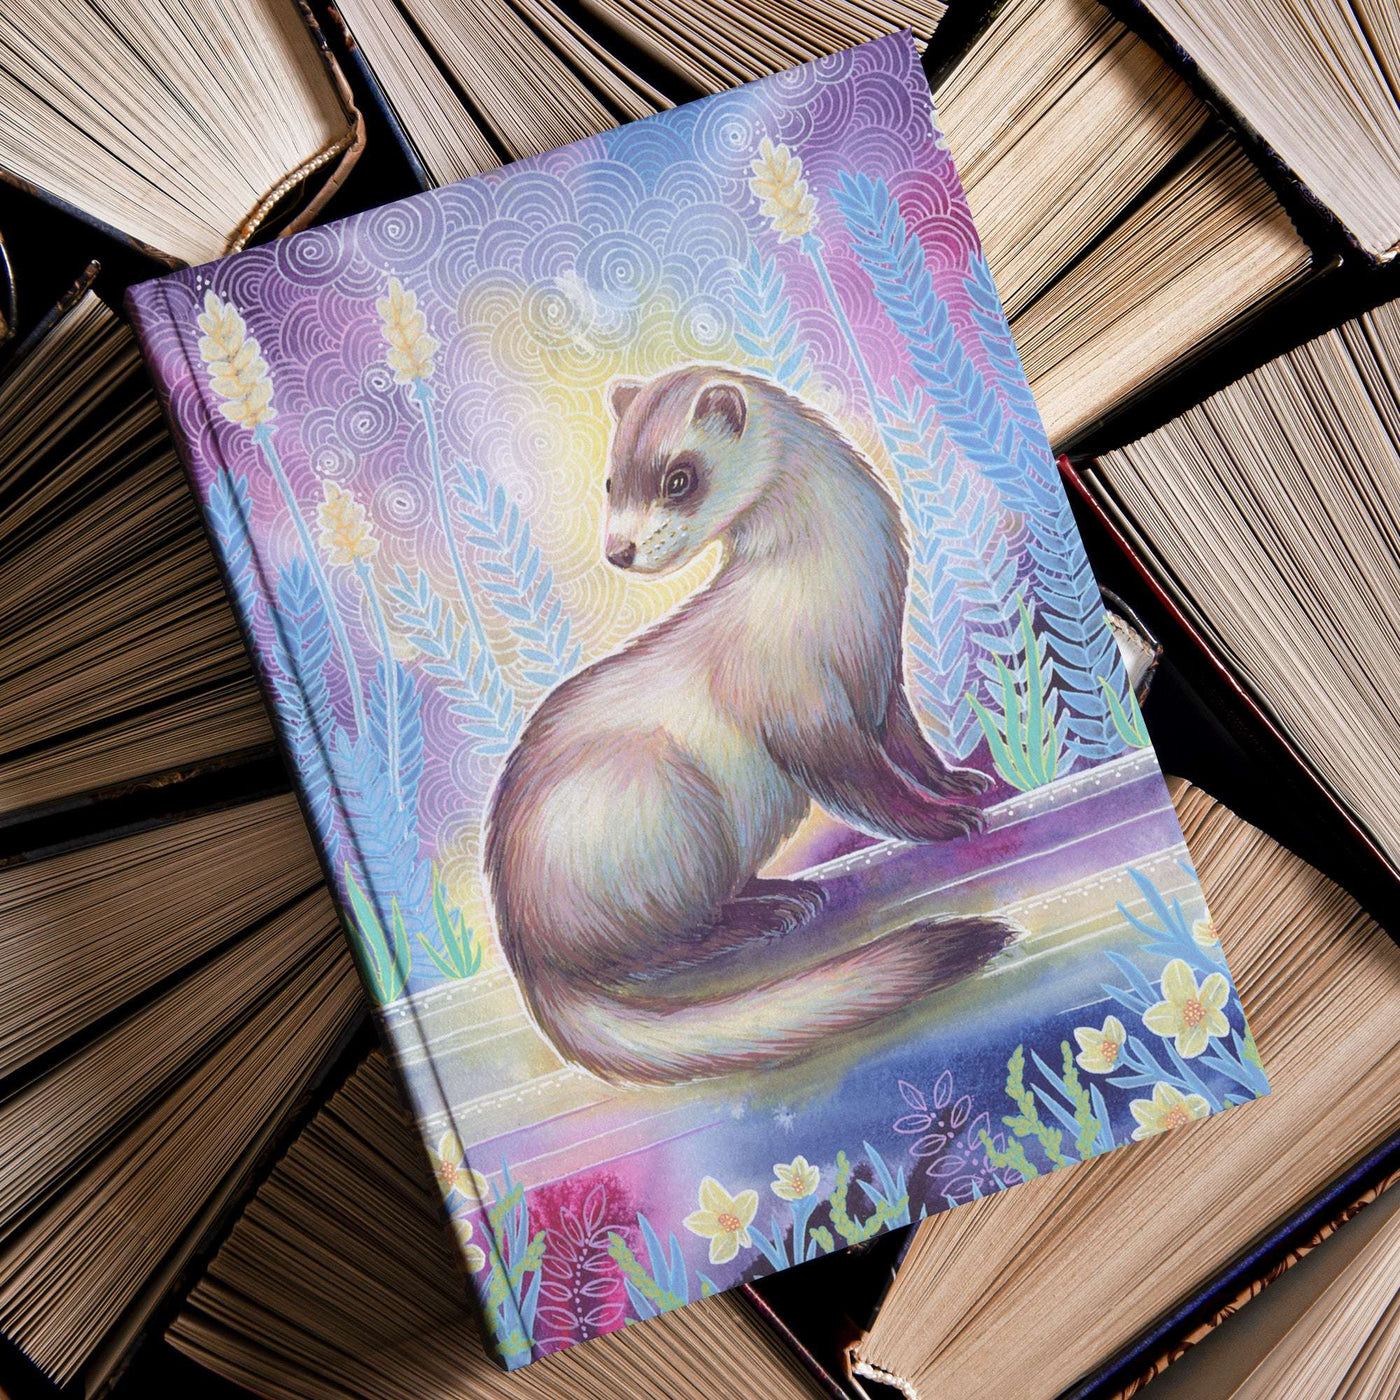 A Ferret Journal with a painted weasel on the cover, resting atop a stack of old, hardcover books.